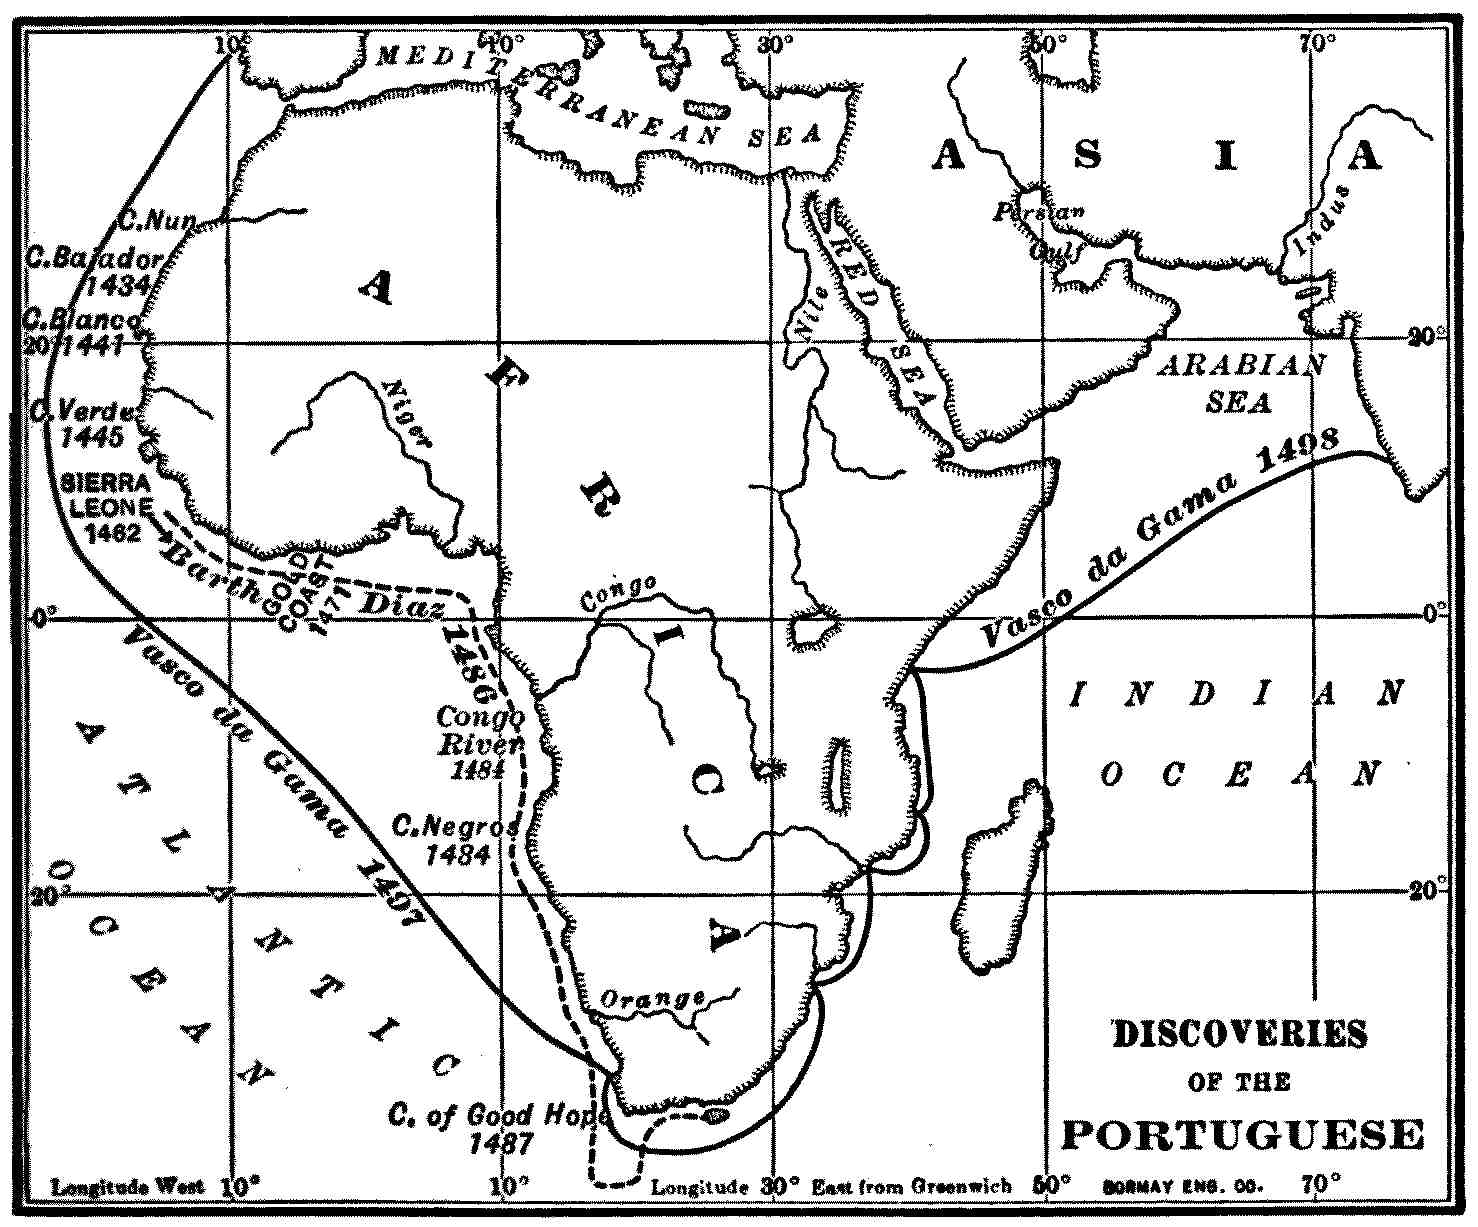 discoveries of the portuguese